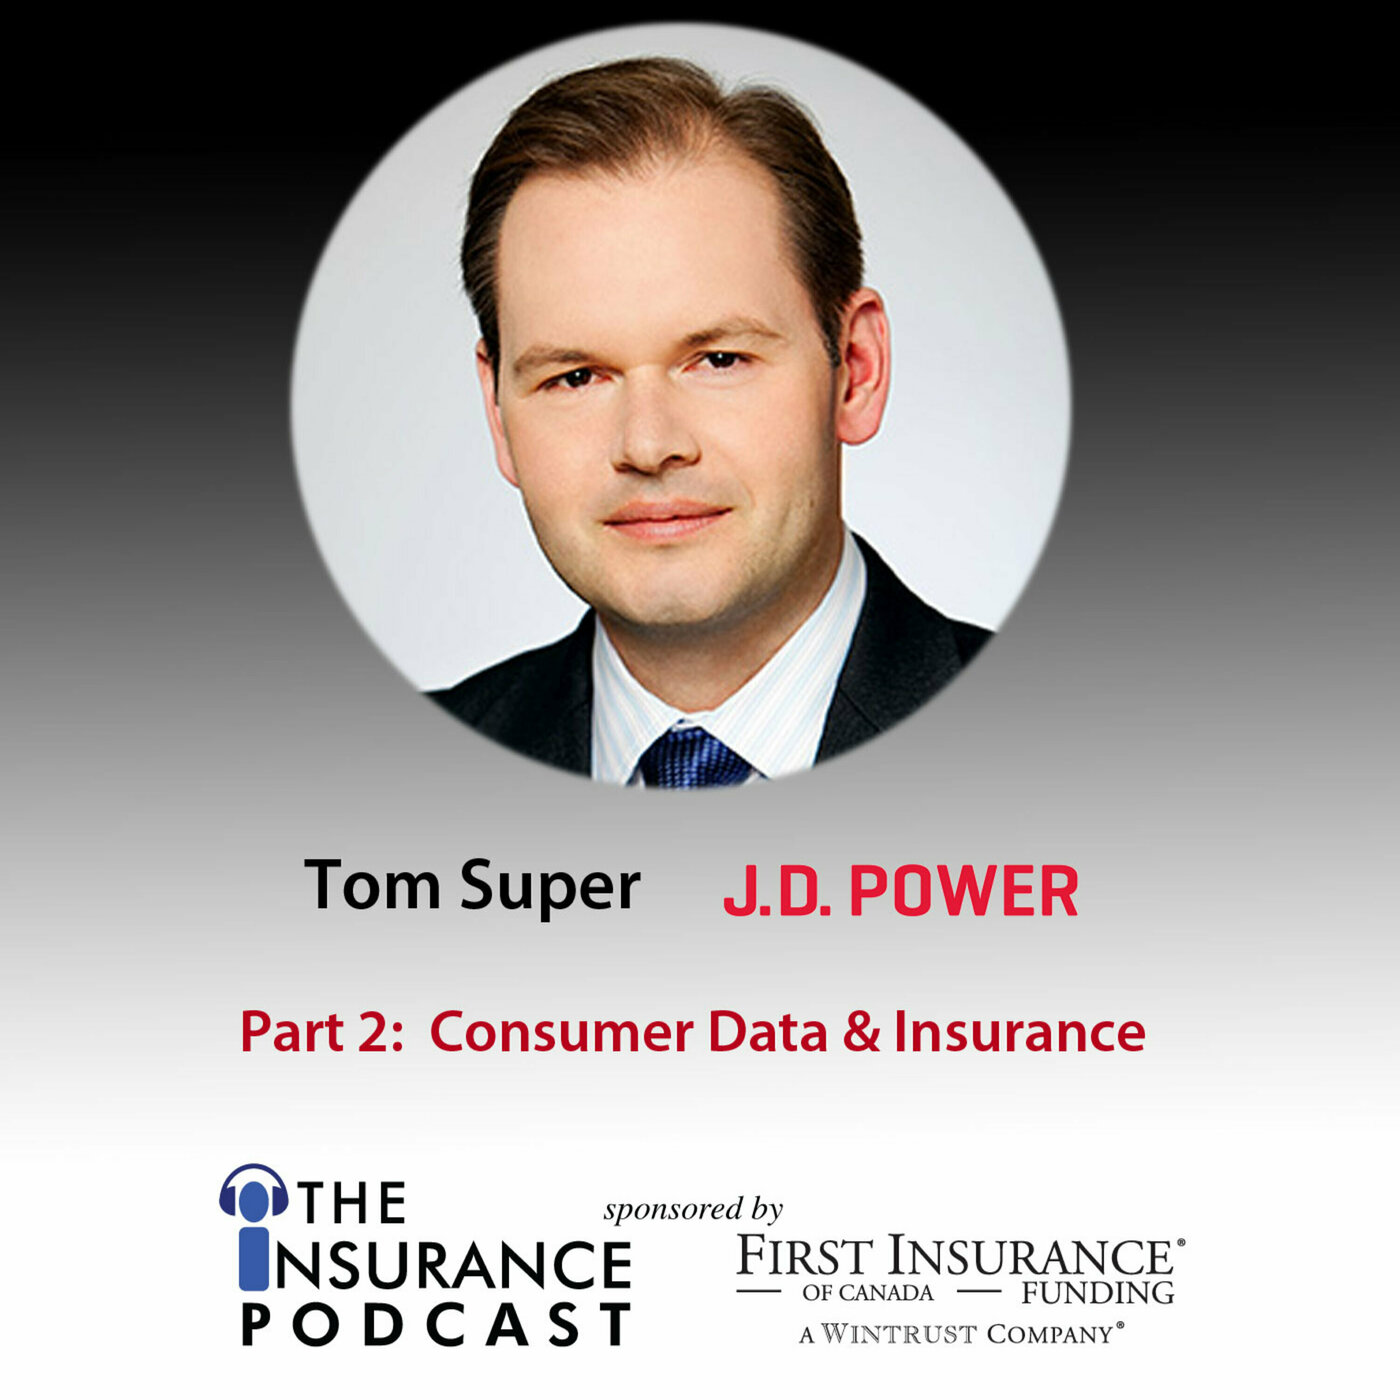 Tom Super from JD Power Part 2 Image